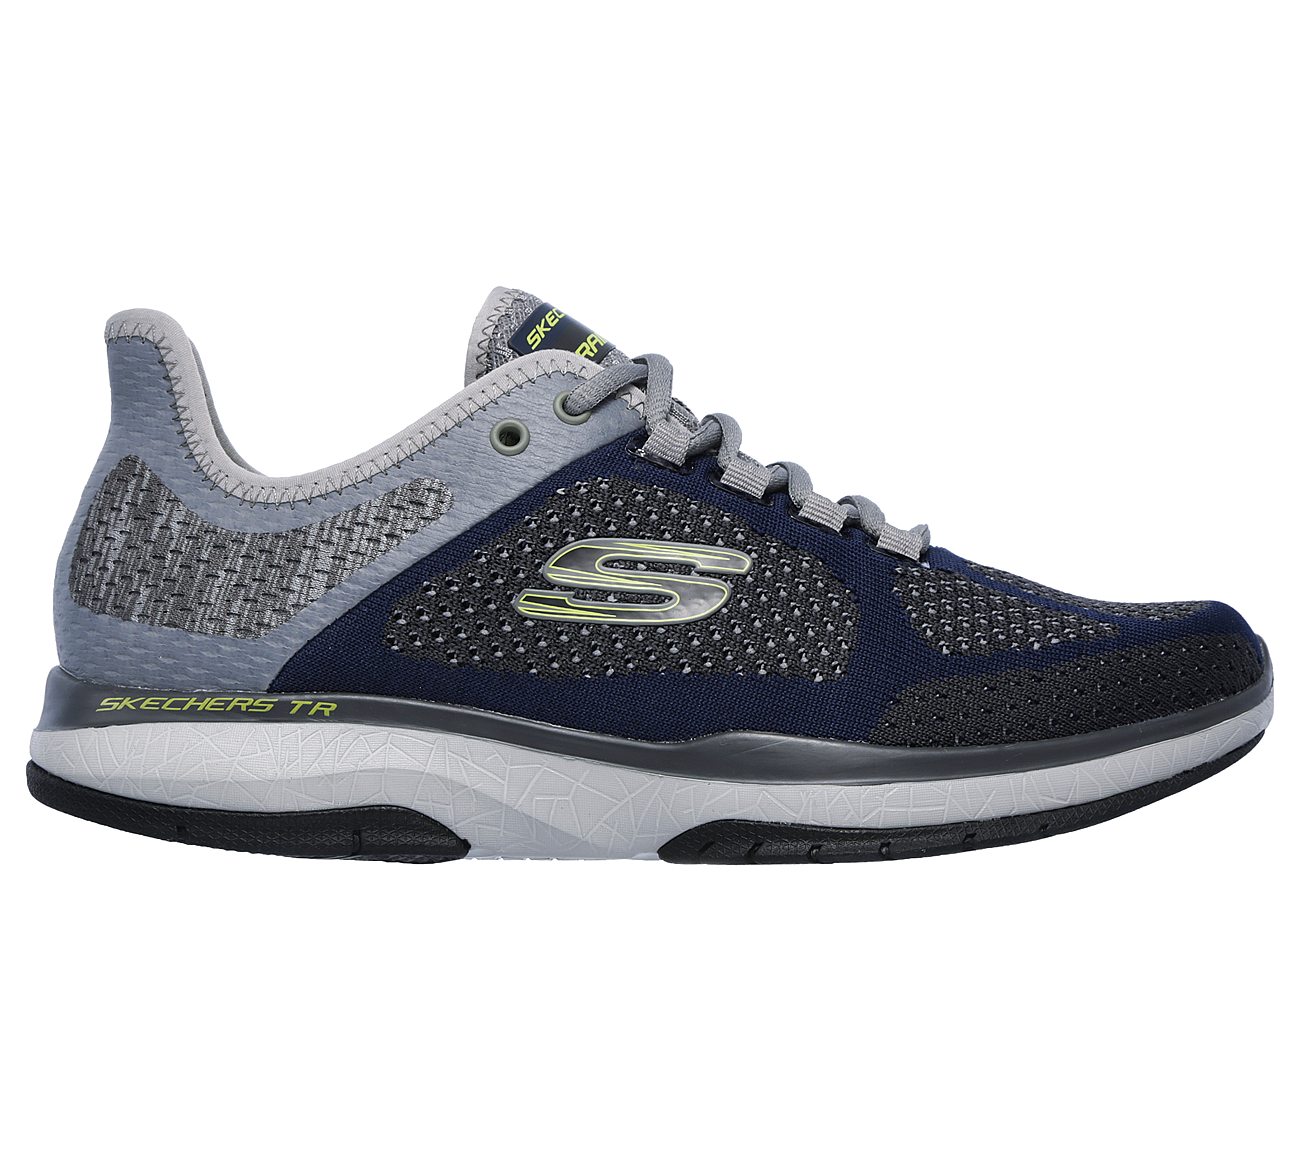 Buy SKECHERS Burst TR - Flinchton Lace-Up Sneakers Shoes only 70,00 €